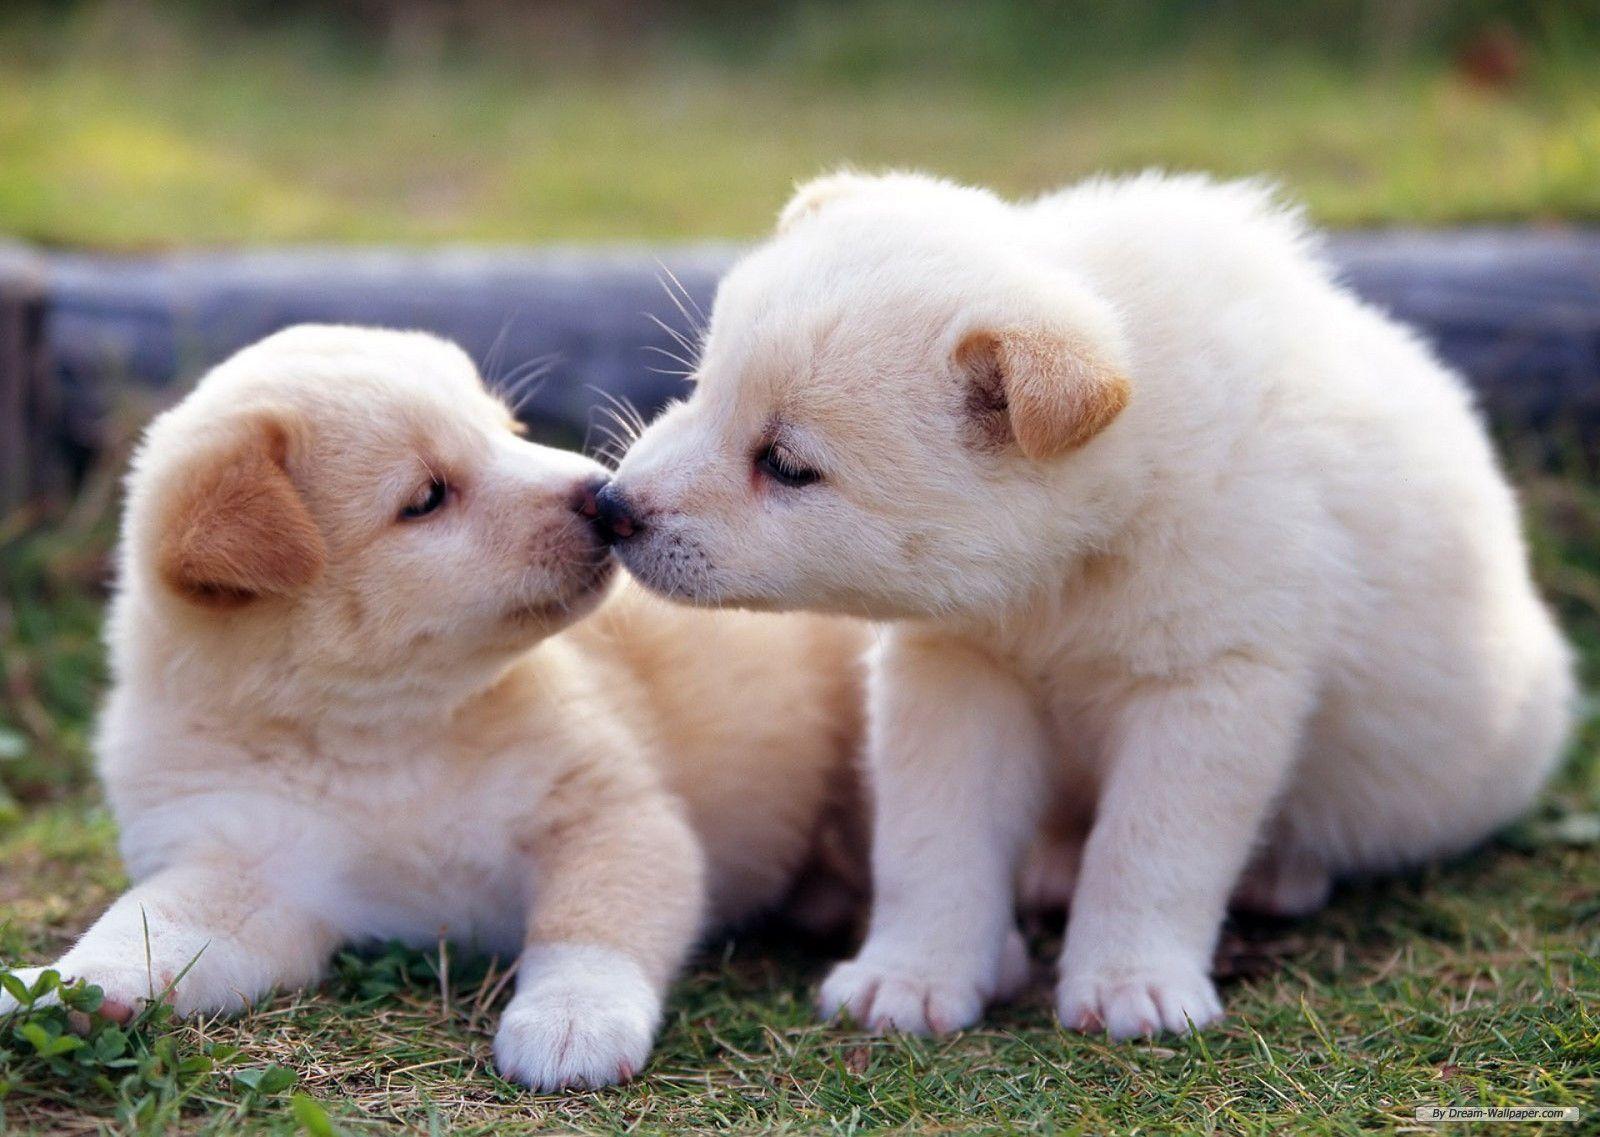 Baby Animals Kissing. Animal Love Fluffy Puppy Dogs Kissing HD